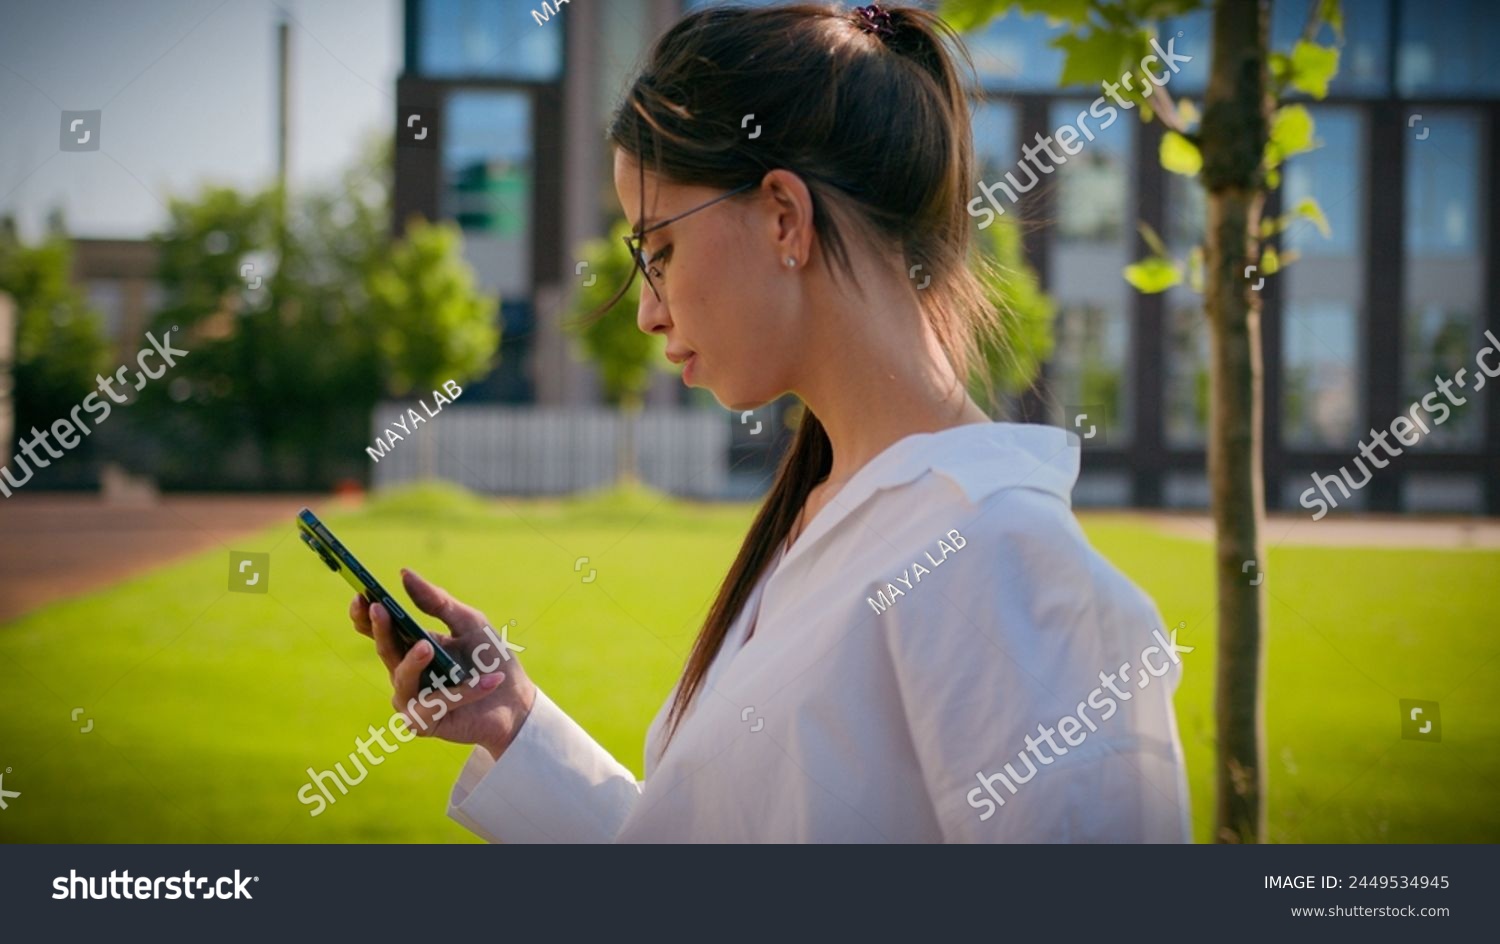 Caucasian woman businesswoman student business lady girl walk on street with green lawn using mobile phone check email browsing social network make order online store on smartphone outdoors side view #2449534945